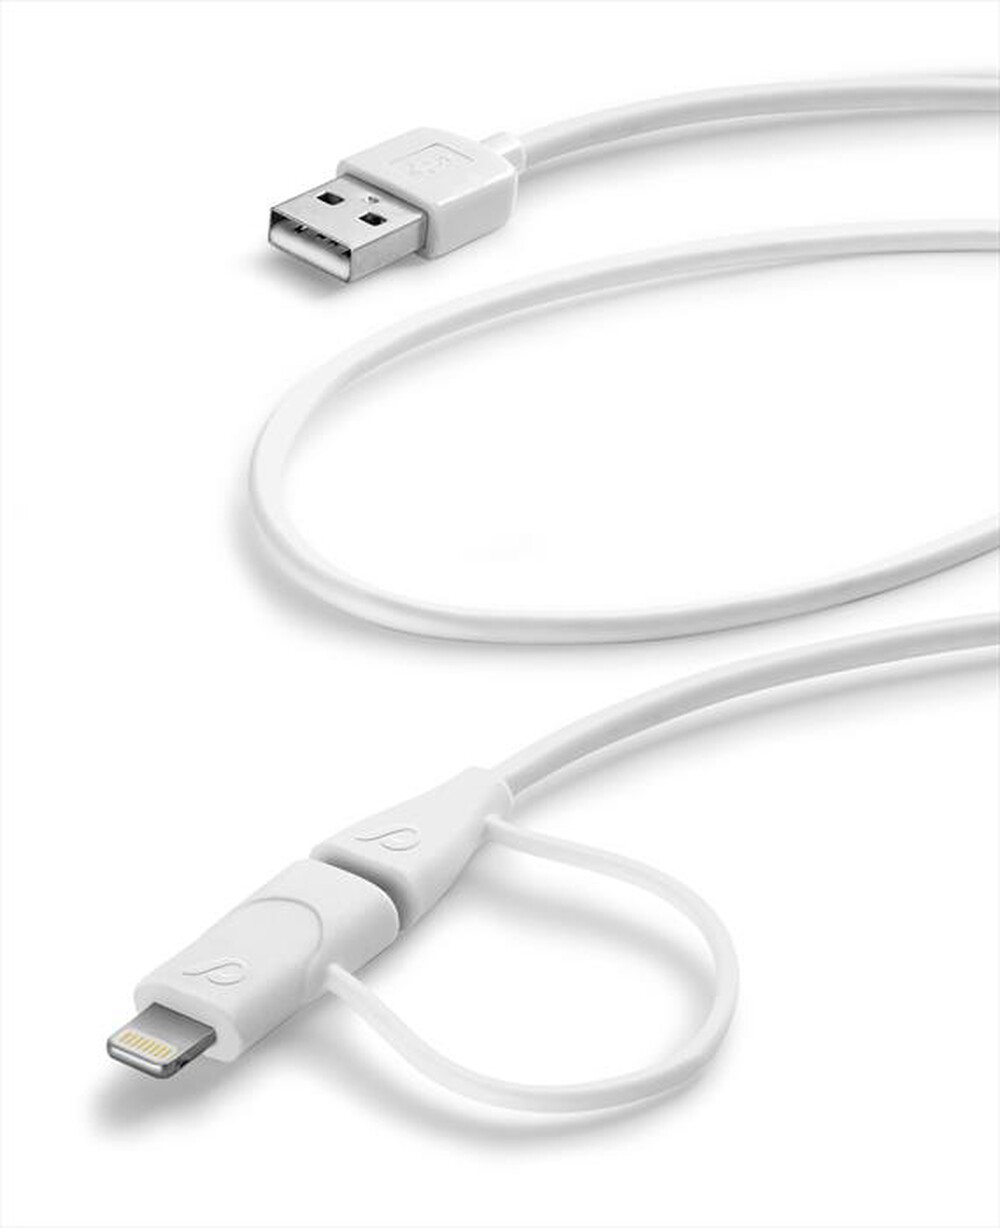 "CELLULARLINE - USB Data Cable Dual For iPhone 5s/5c/5-Bianco"